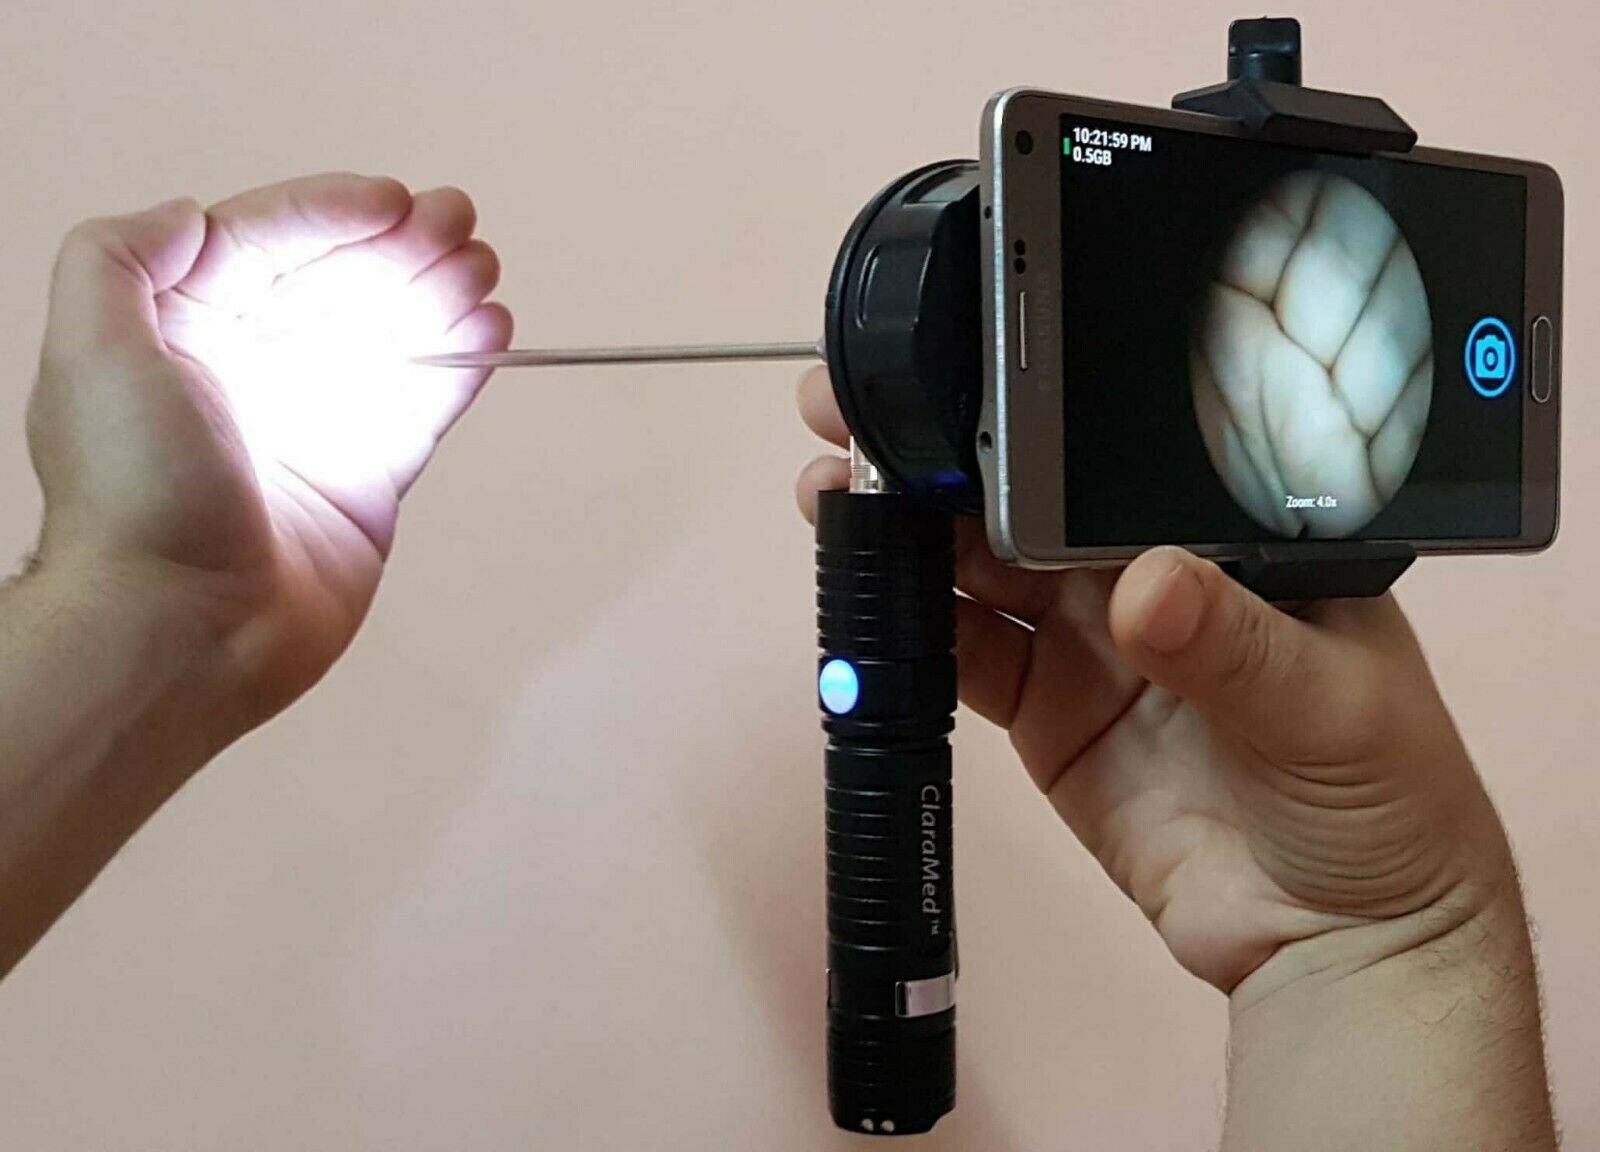 ClaraMed mobile smartphone endoscope adapter with Smart LED light source S1